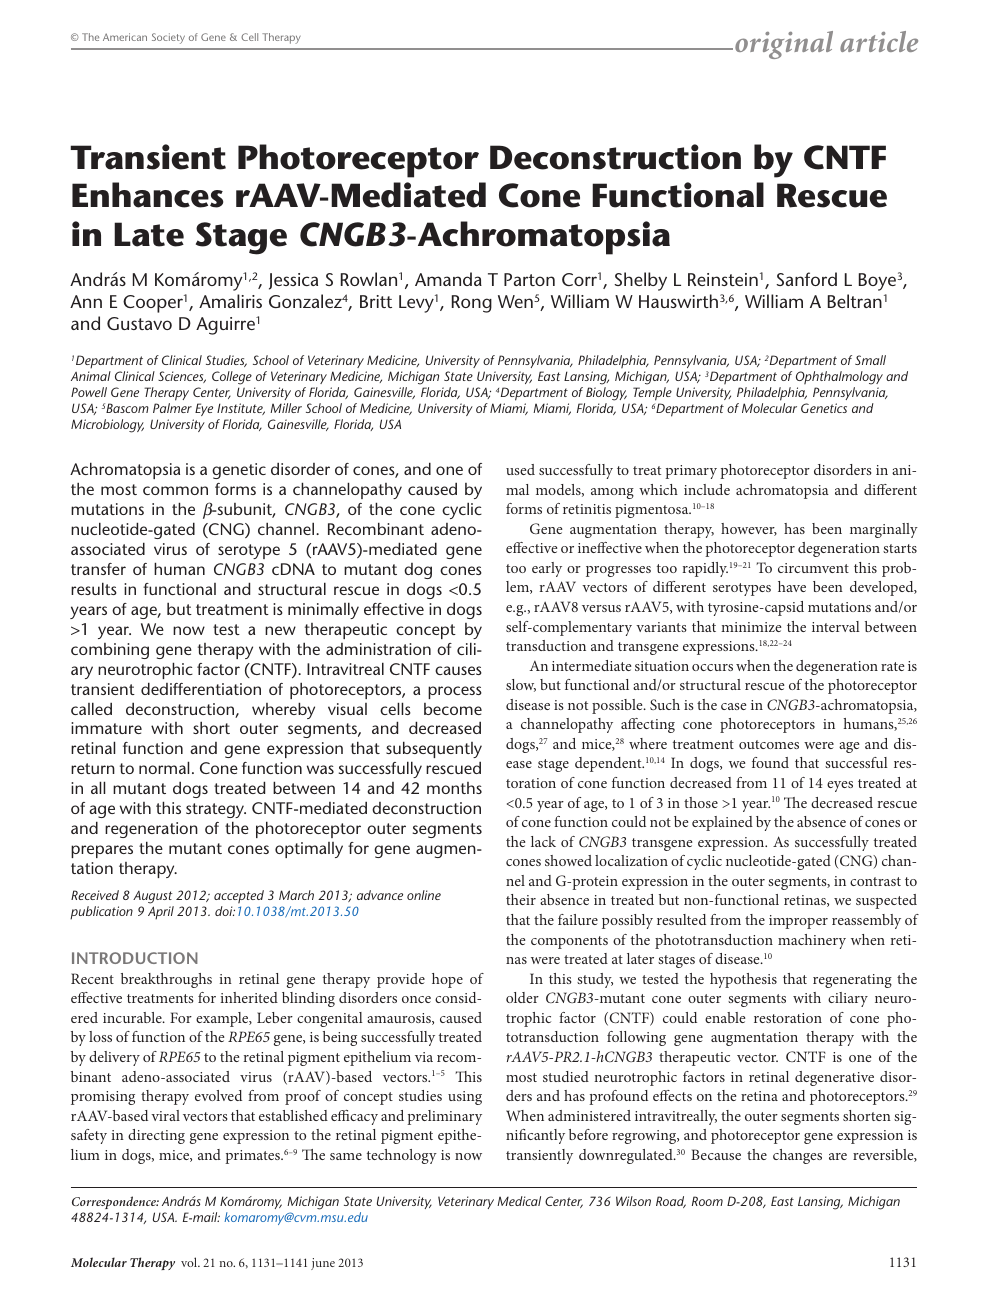 Transient Photoreceptor Deconstruction By Cntf Enhances Raav Mediated Cone Functional Rescue In Late Stage Cngb3 Achromatopsia Topic Of Research Paper In Biological Sciences Download Scholarly Article Pdf And Read For Free On Cyberleninka